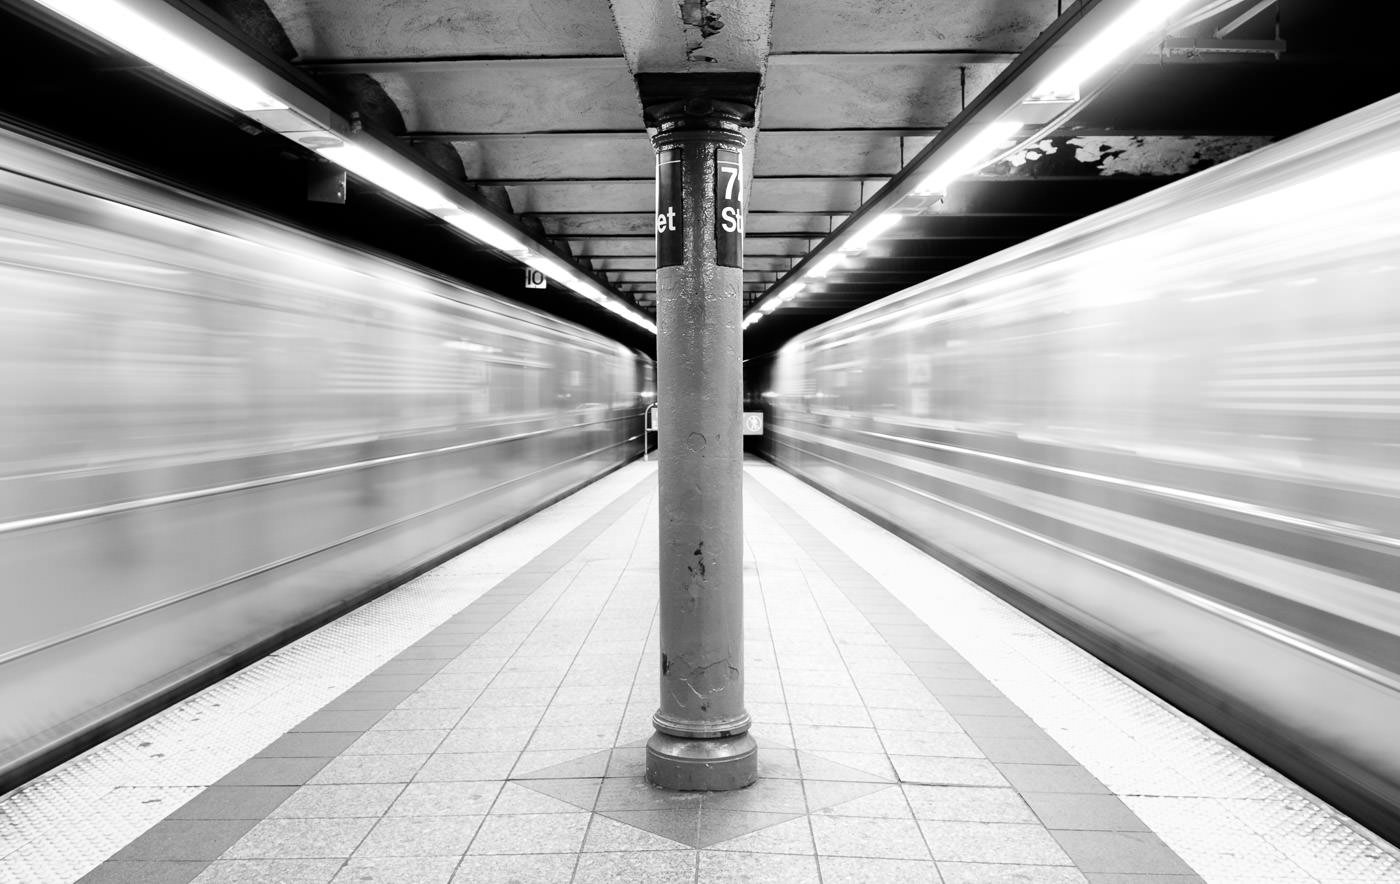 NYC Subway trains rushing by both sides of platform, creating blurred space around the centre